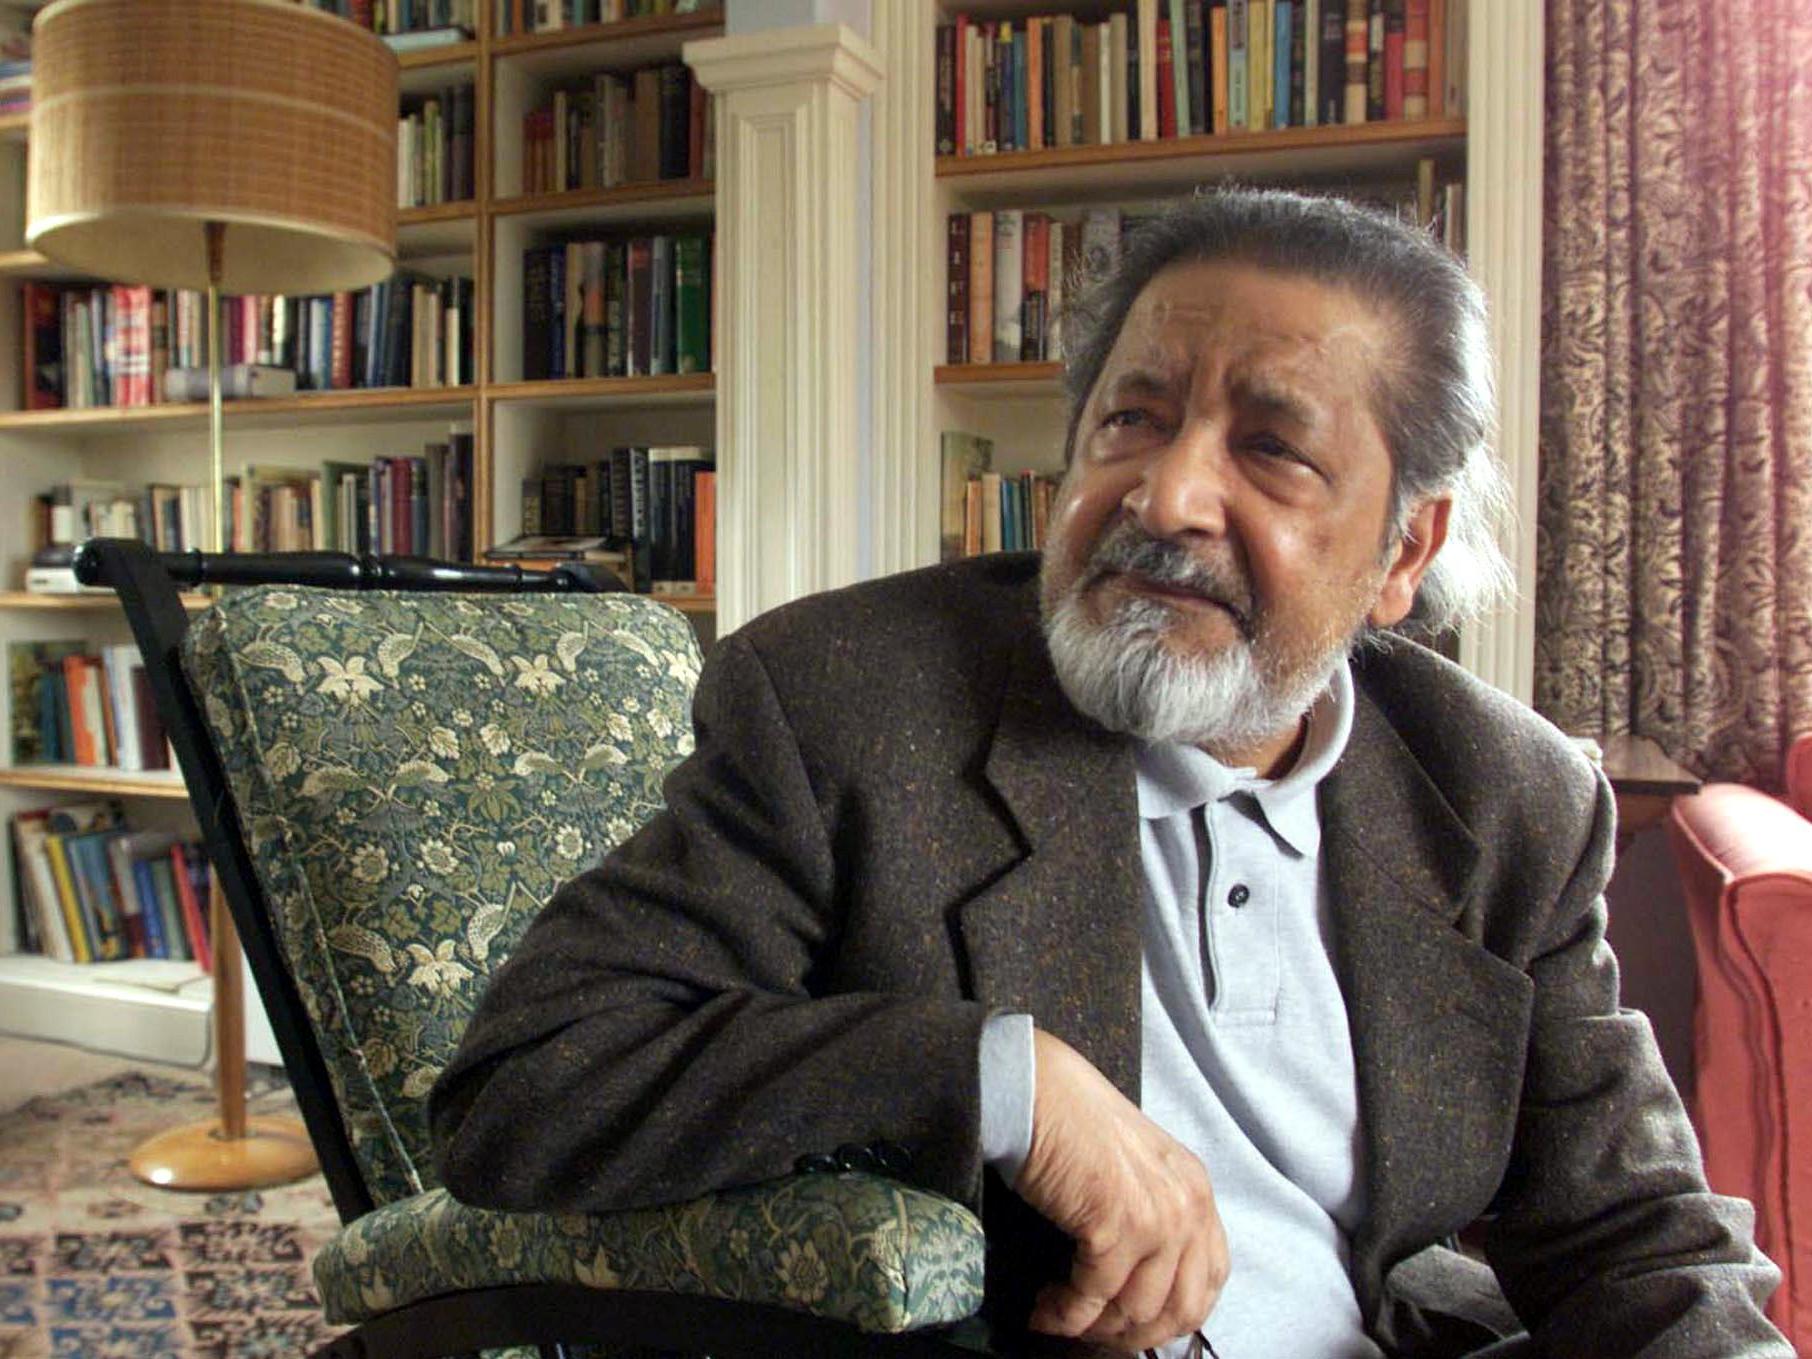 VS Naipaul was awarded the Nobel Prize for Literature in 2001